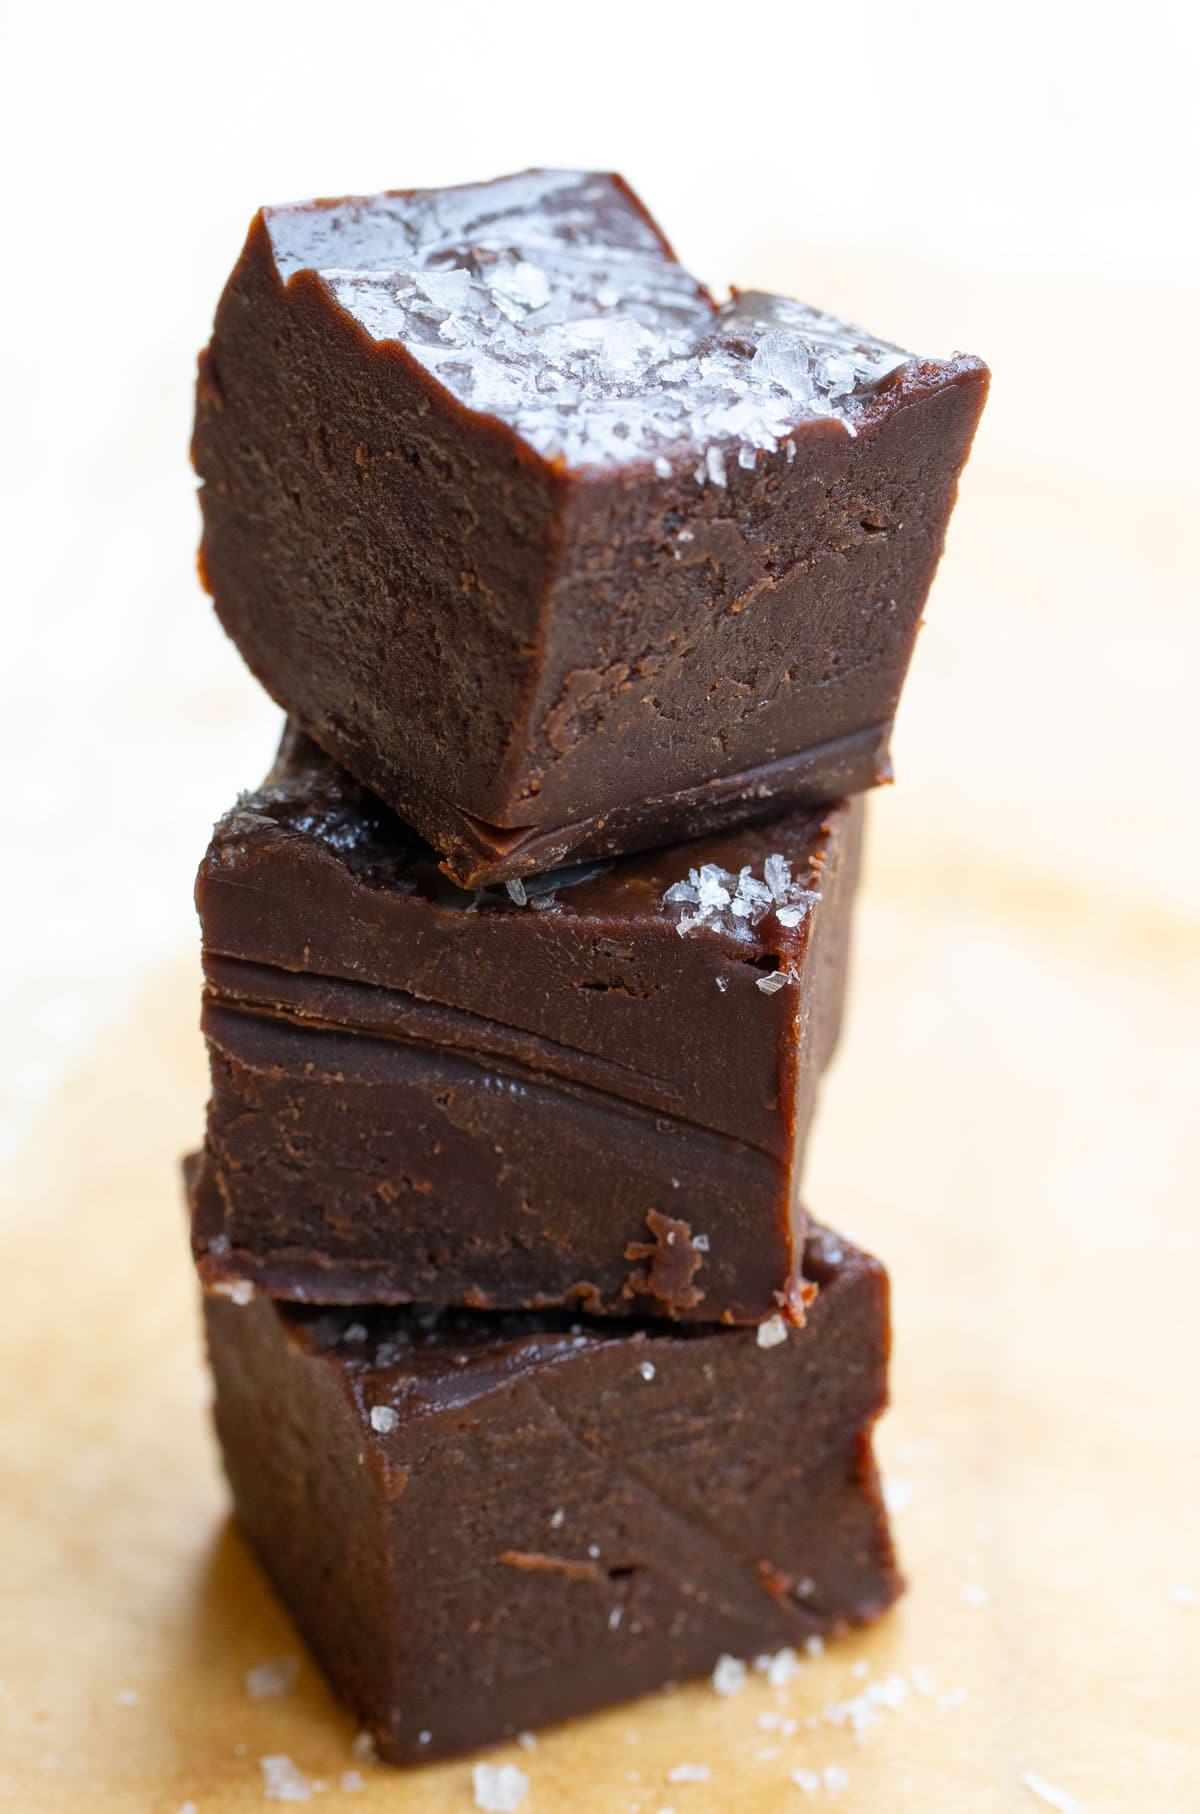 A stack of chocolate fudge squares.